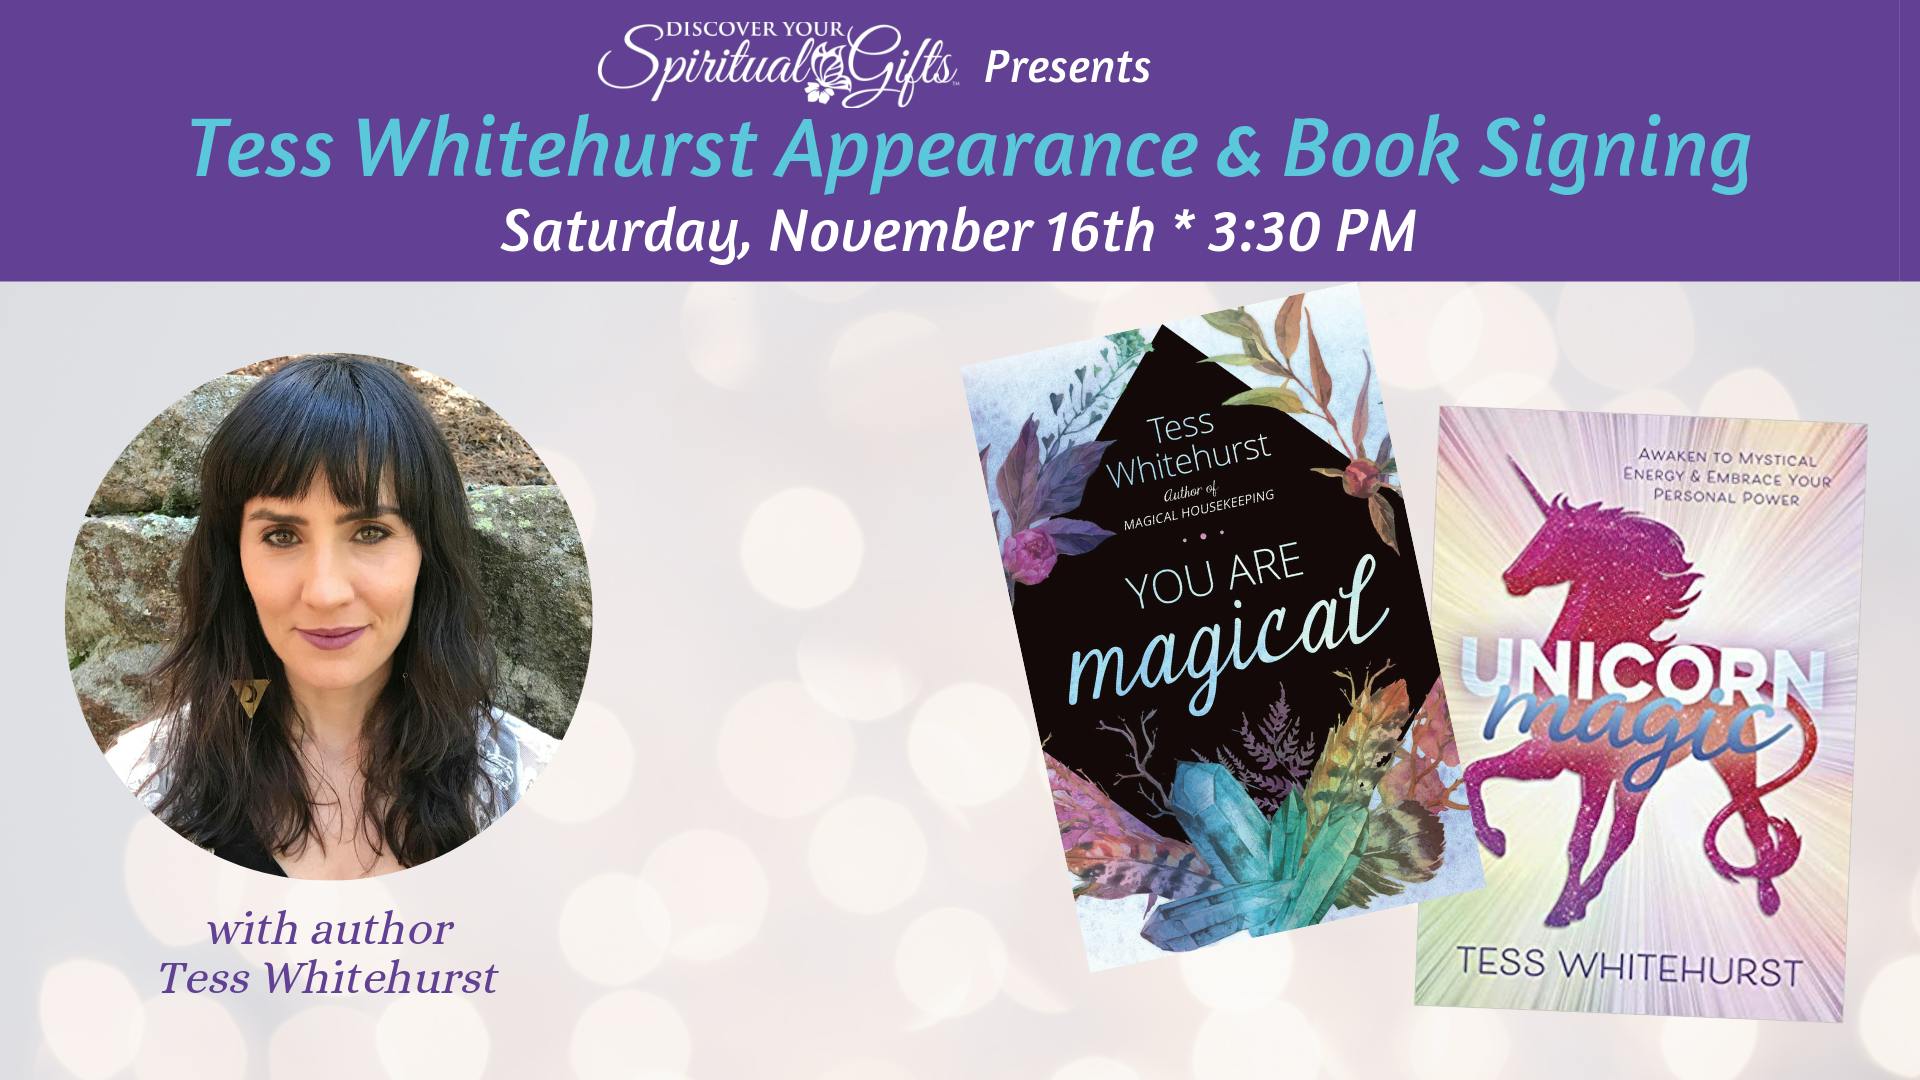 Tess Whitehurst Appearance & Book Signing